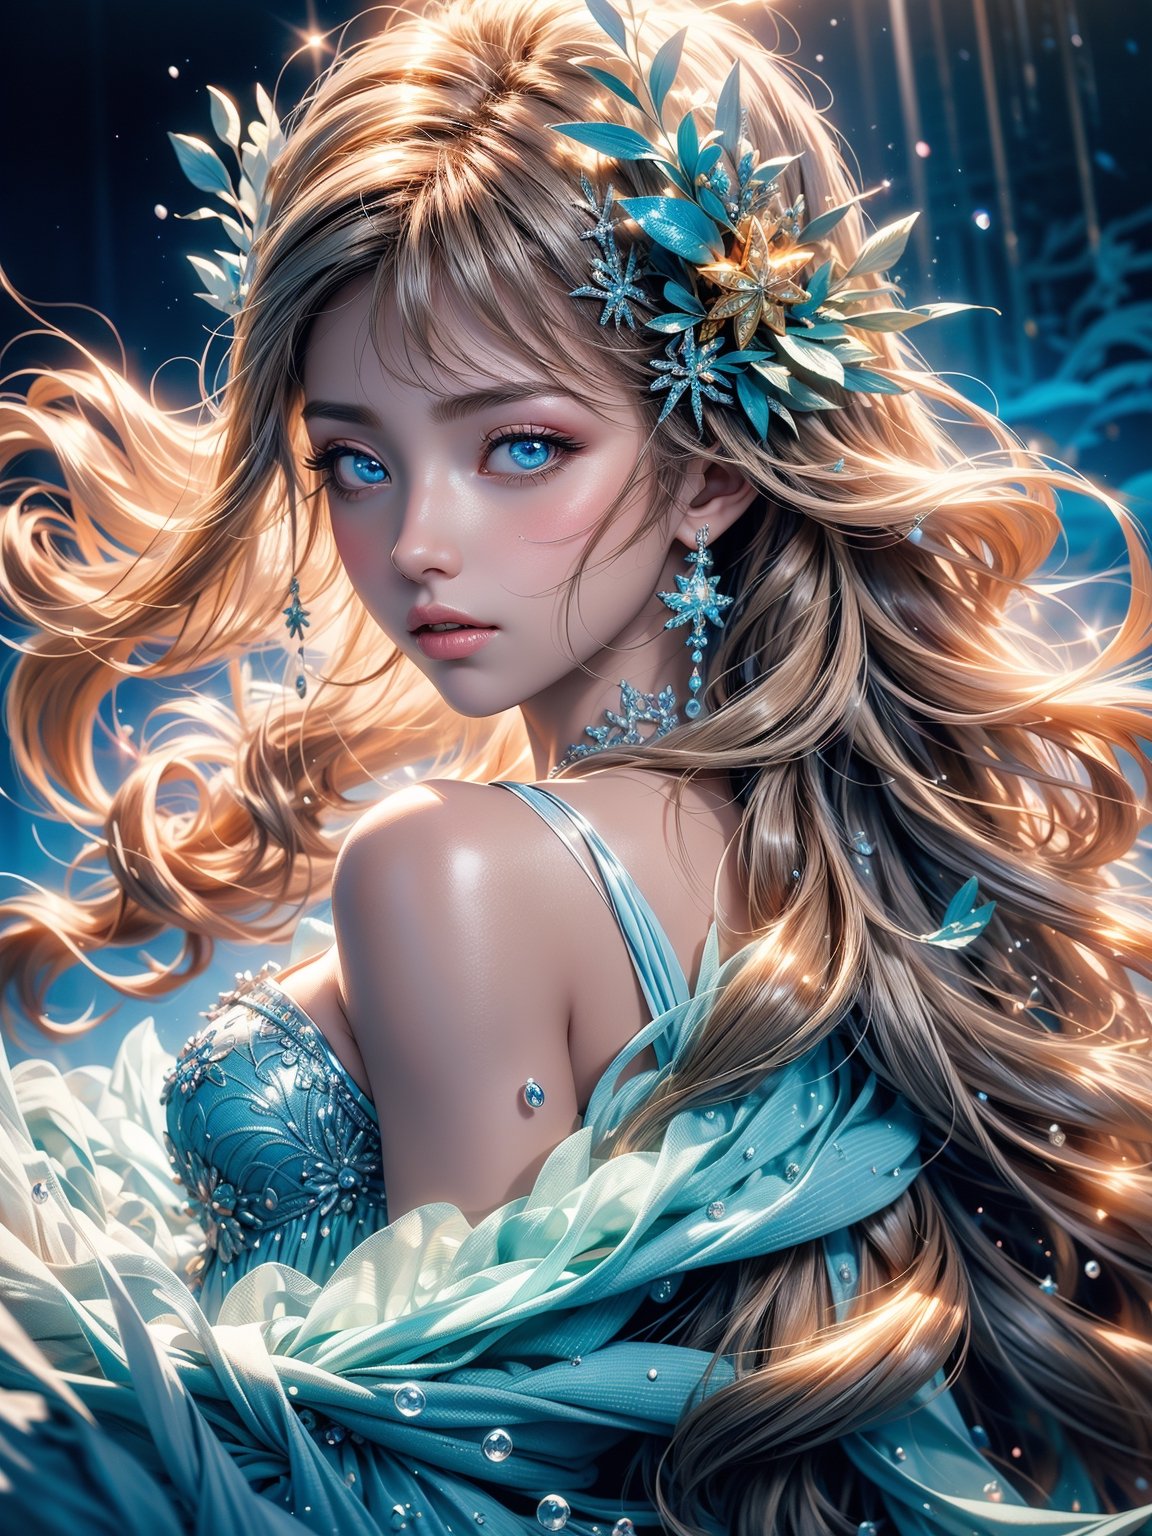 A close-up shot of a young woman with beautiful flowing hair and mesmerizing eyes, wearing a flowing blue and white dress made of waves, in a tranquil underwater world filled with coral reefs, representing beauty and elegance. This is a captivating 8K still photograph taken at sunset, against a radiant and rainbow-like holographic background, capturing a dynamic pose. This moment feels like a highlight in the middle of a journey.